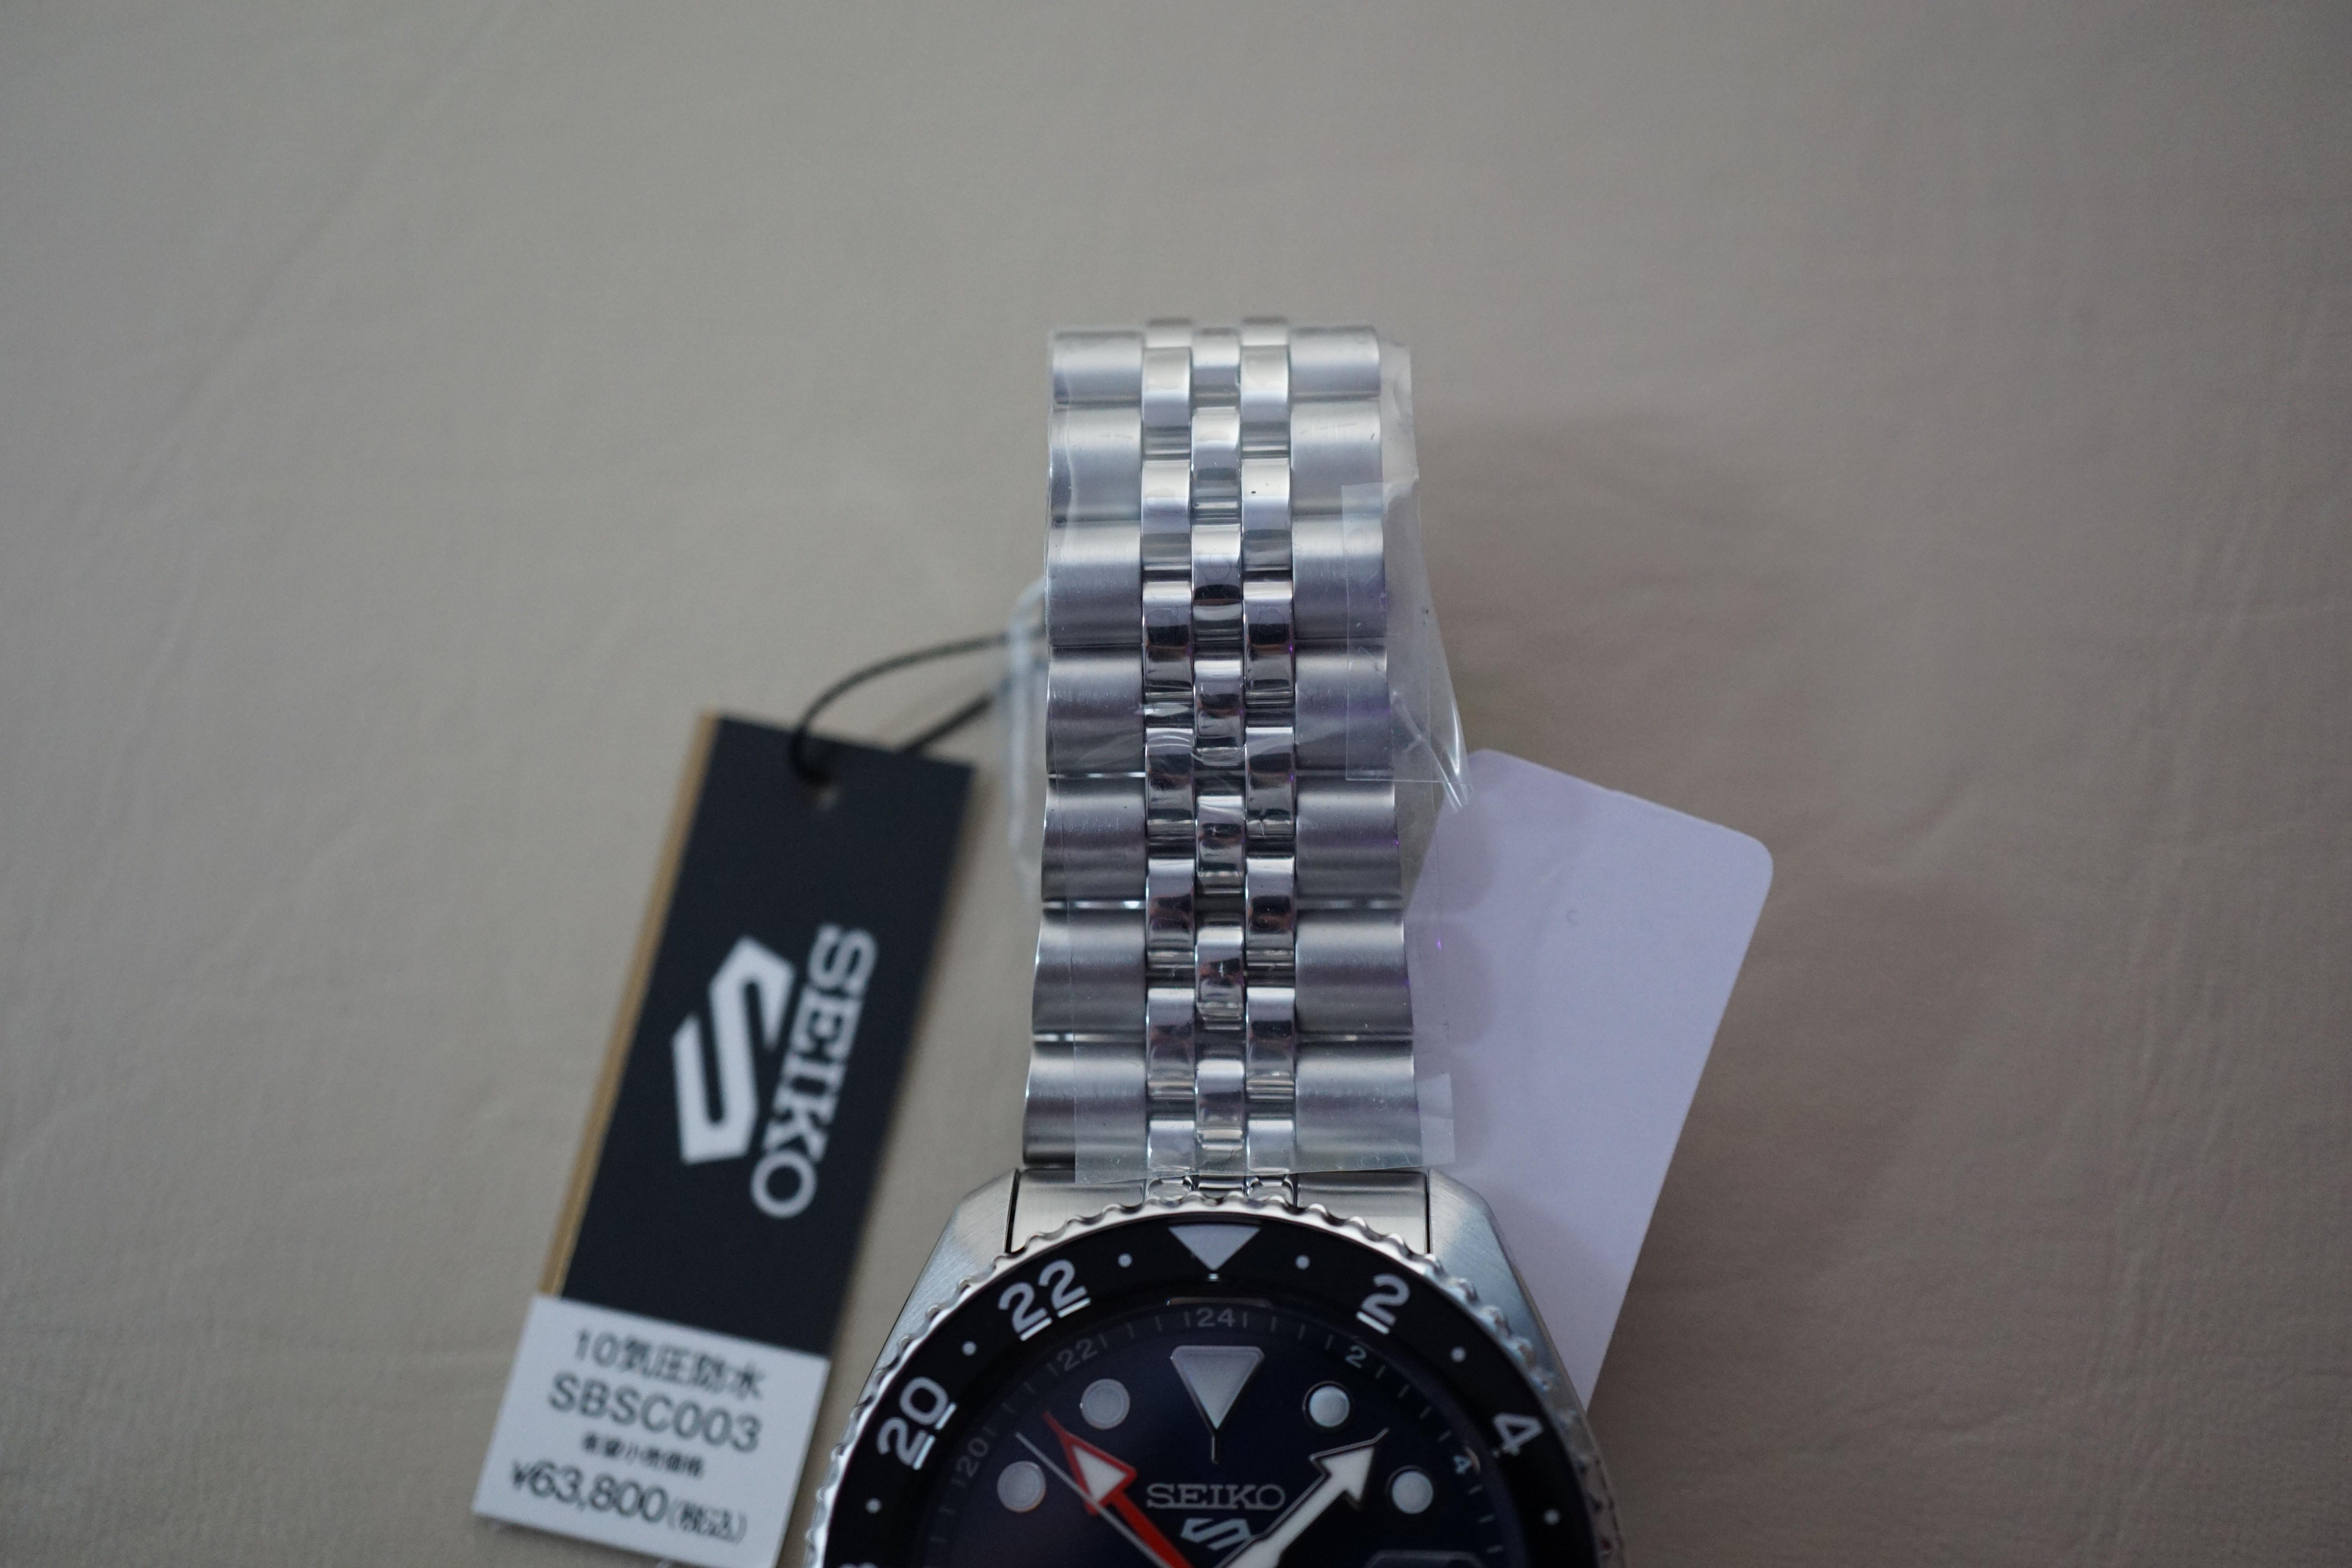 WTS] New Seiko SBSC003 4R34 